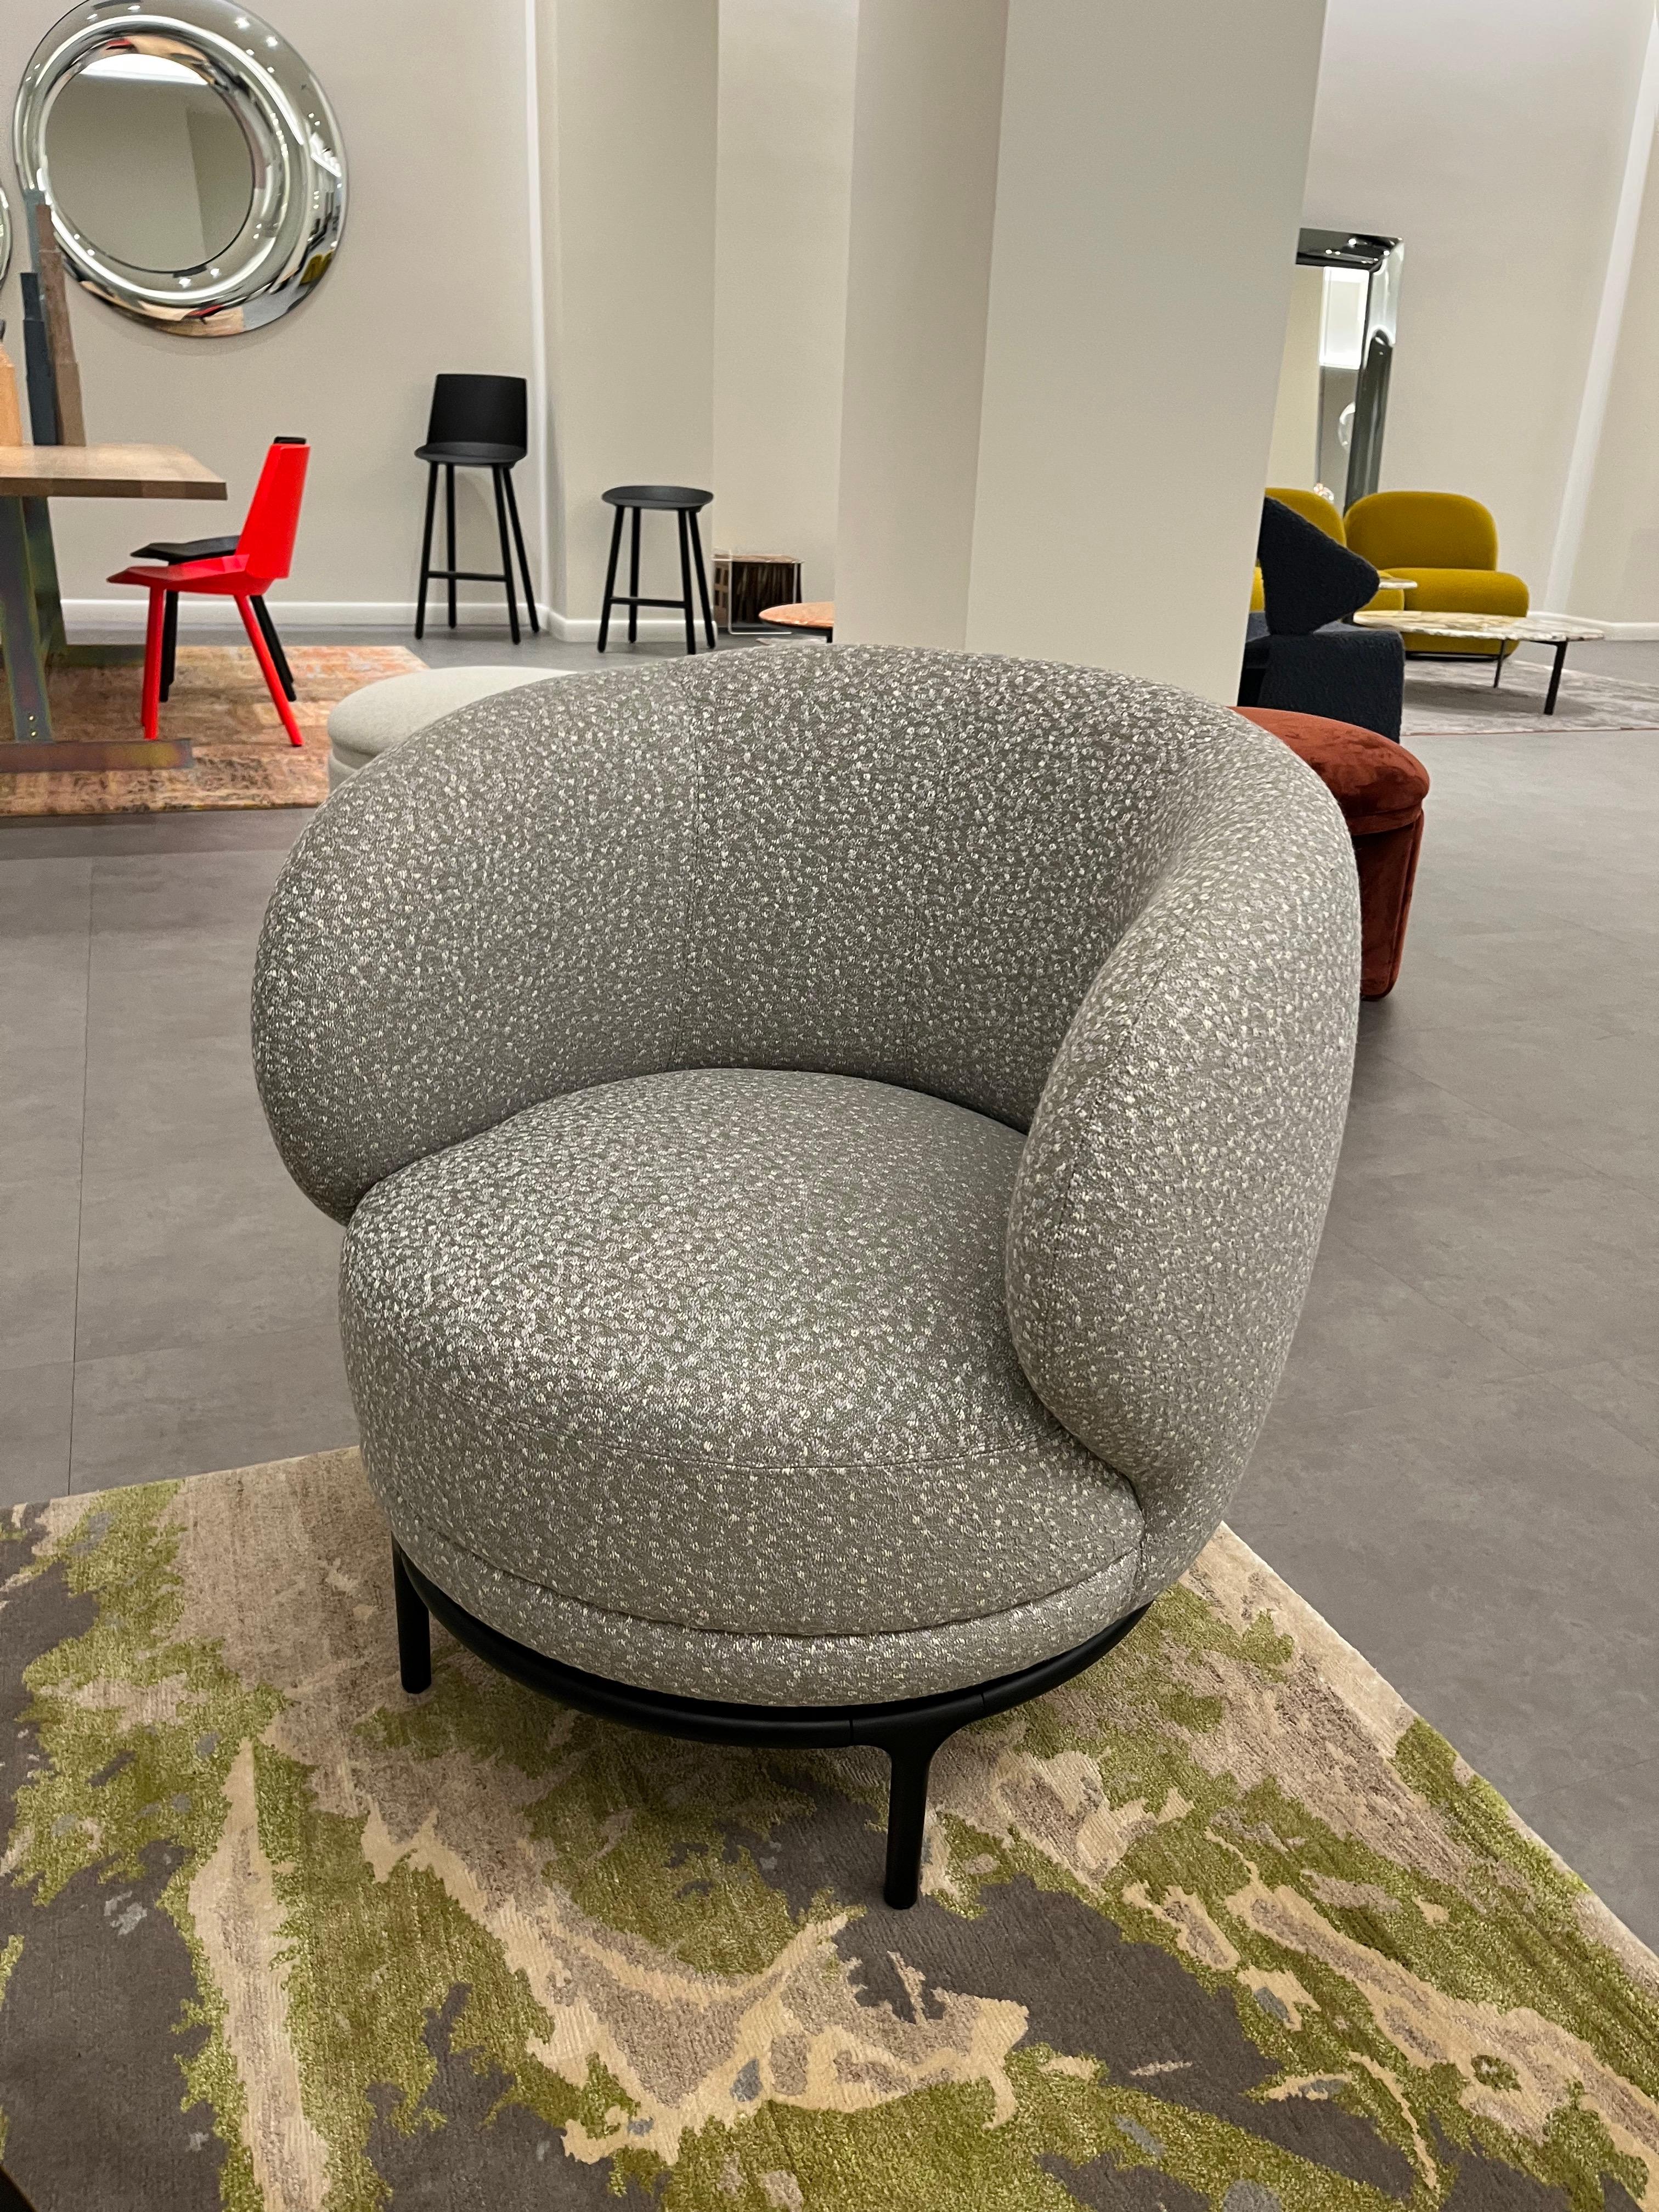 Fabric Wittmann Vuelta 72 Swivel Lounge Chair by Jaime Hayon in STOCK